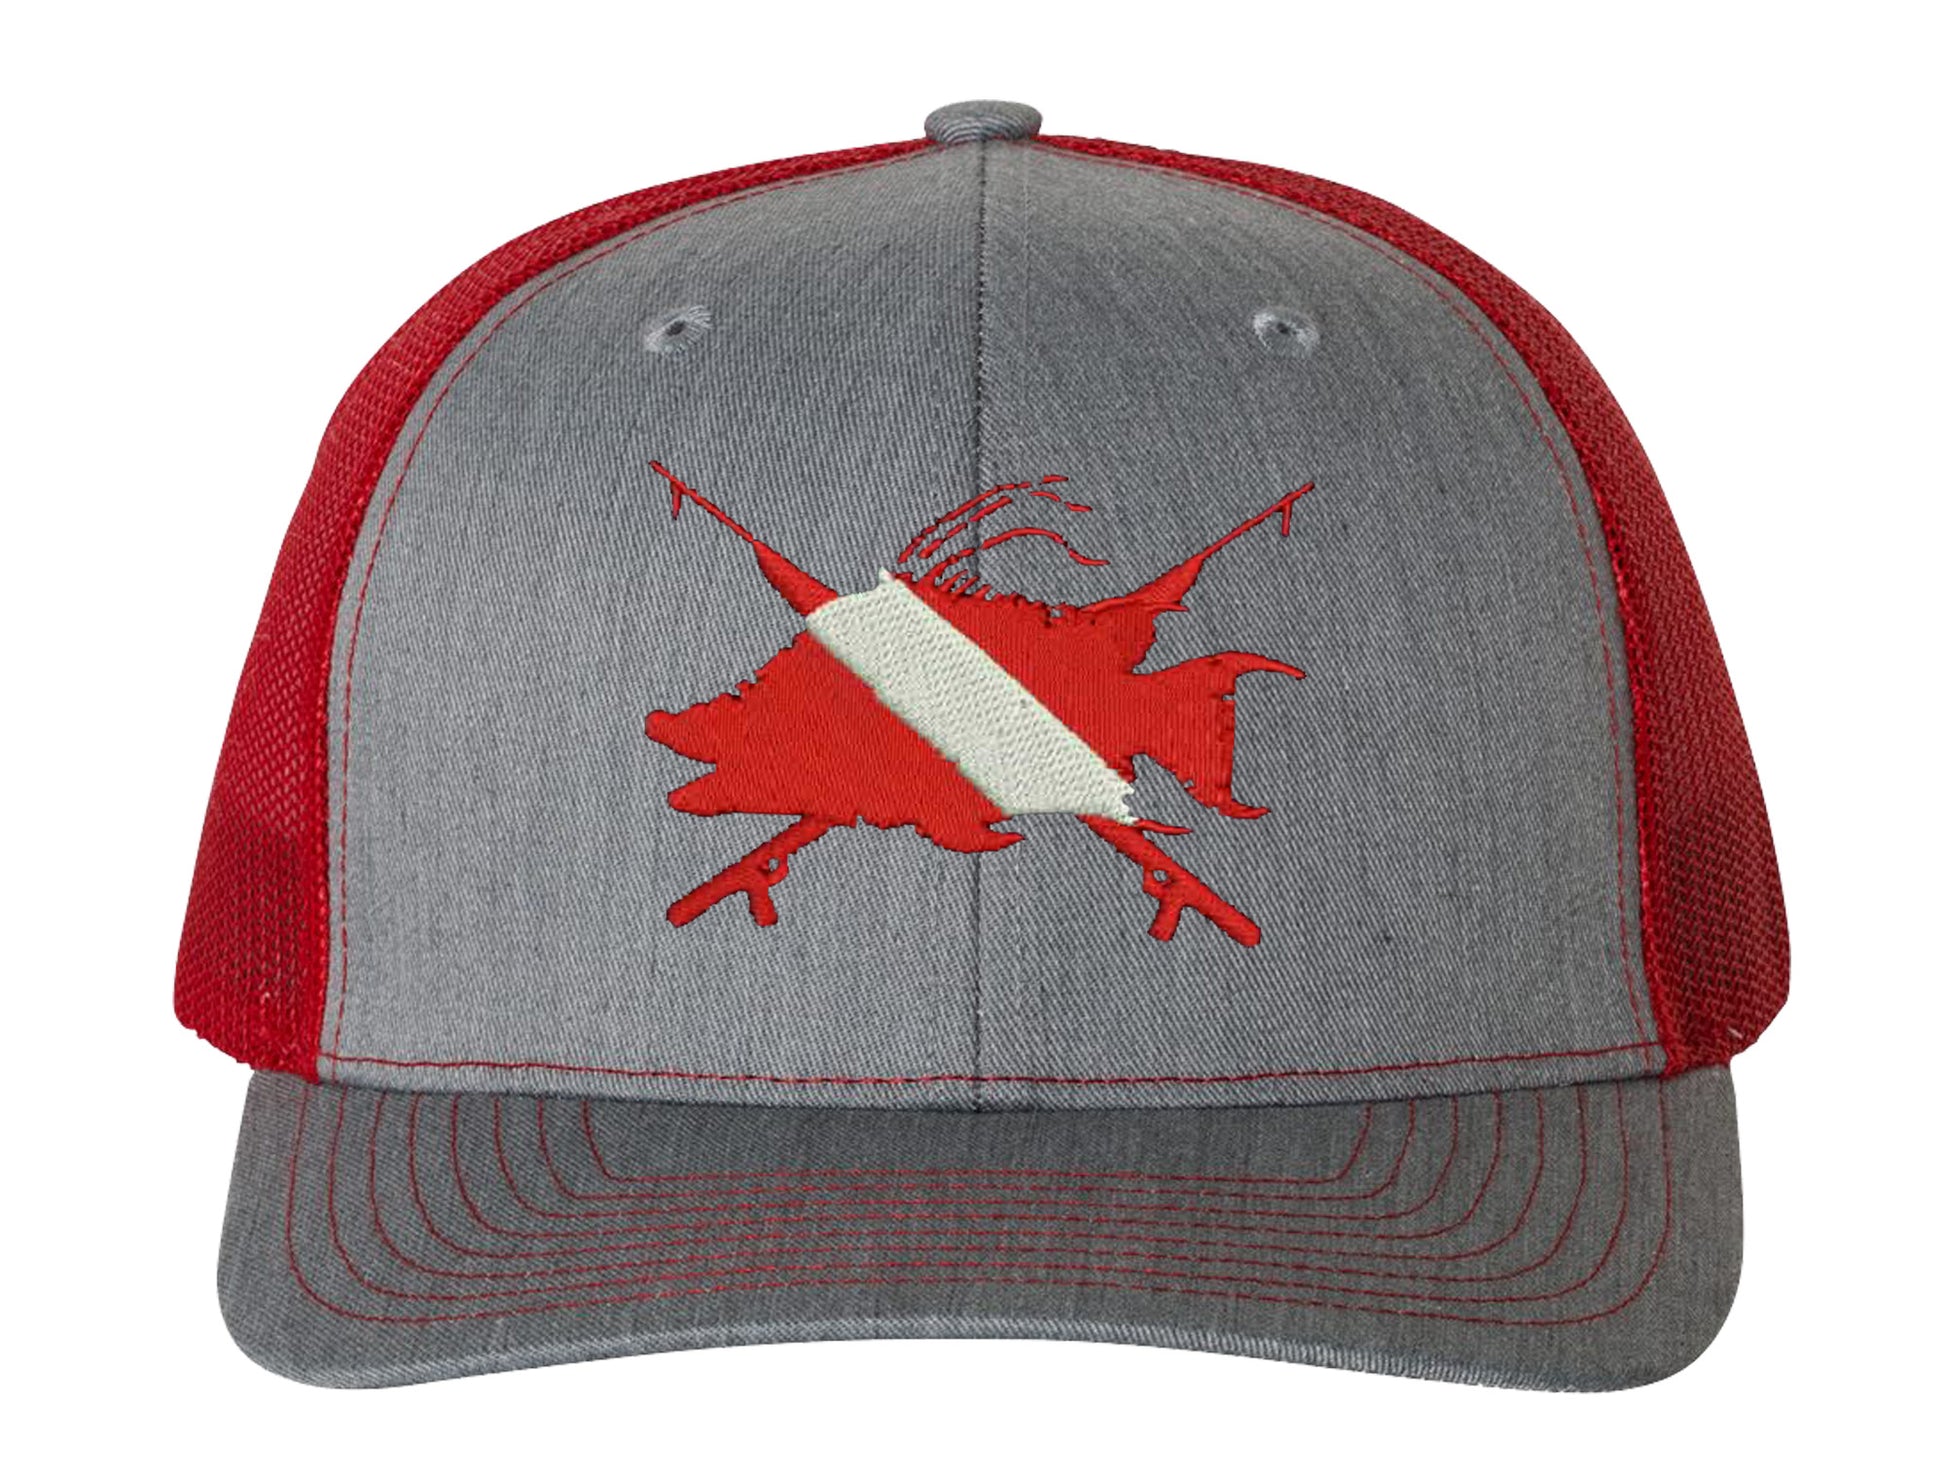 Hogfish Dive Spears Structured Trucker Snapback Hats - *9 Colors! Hthr Gray/Red Mesh